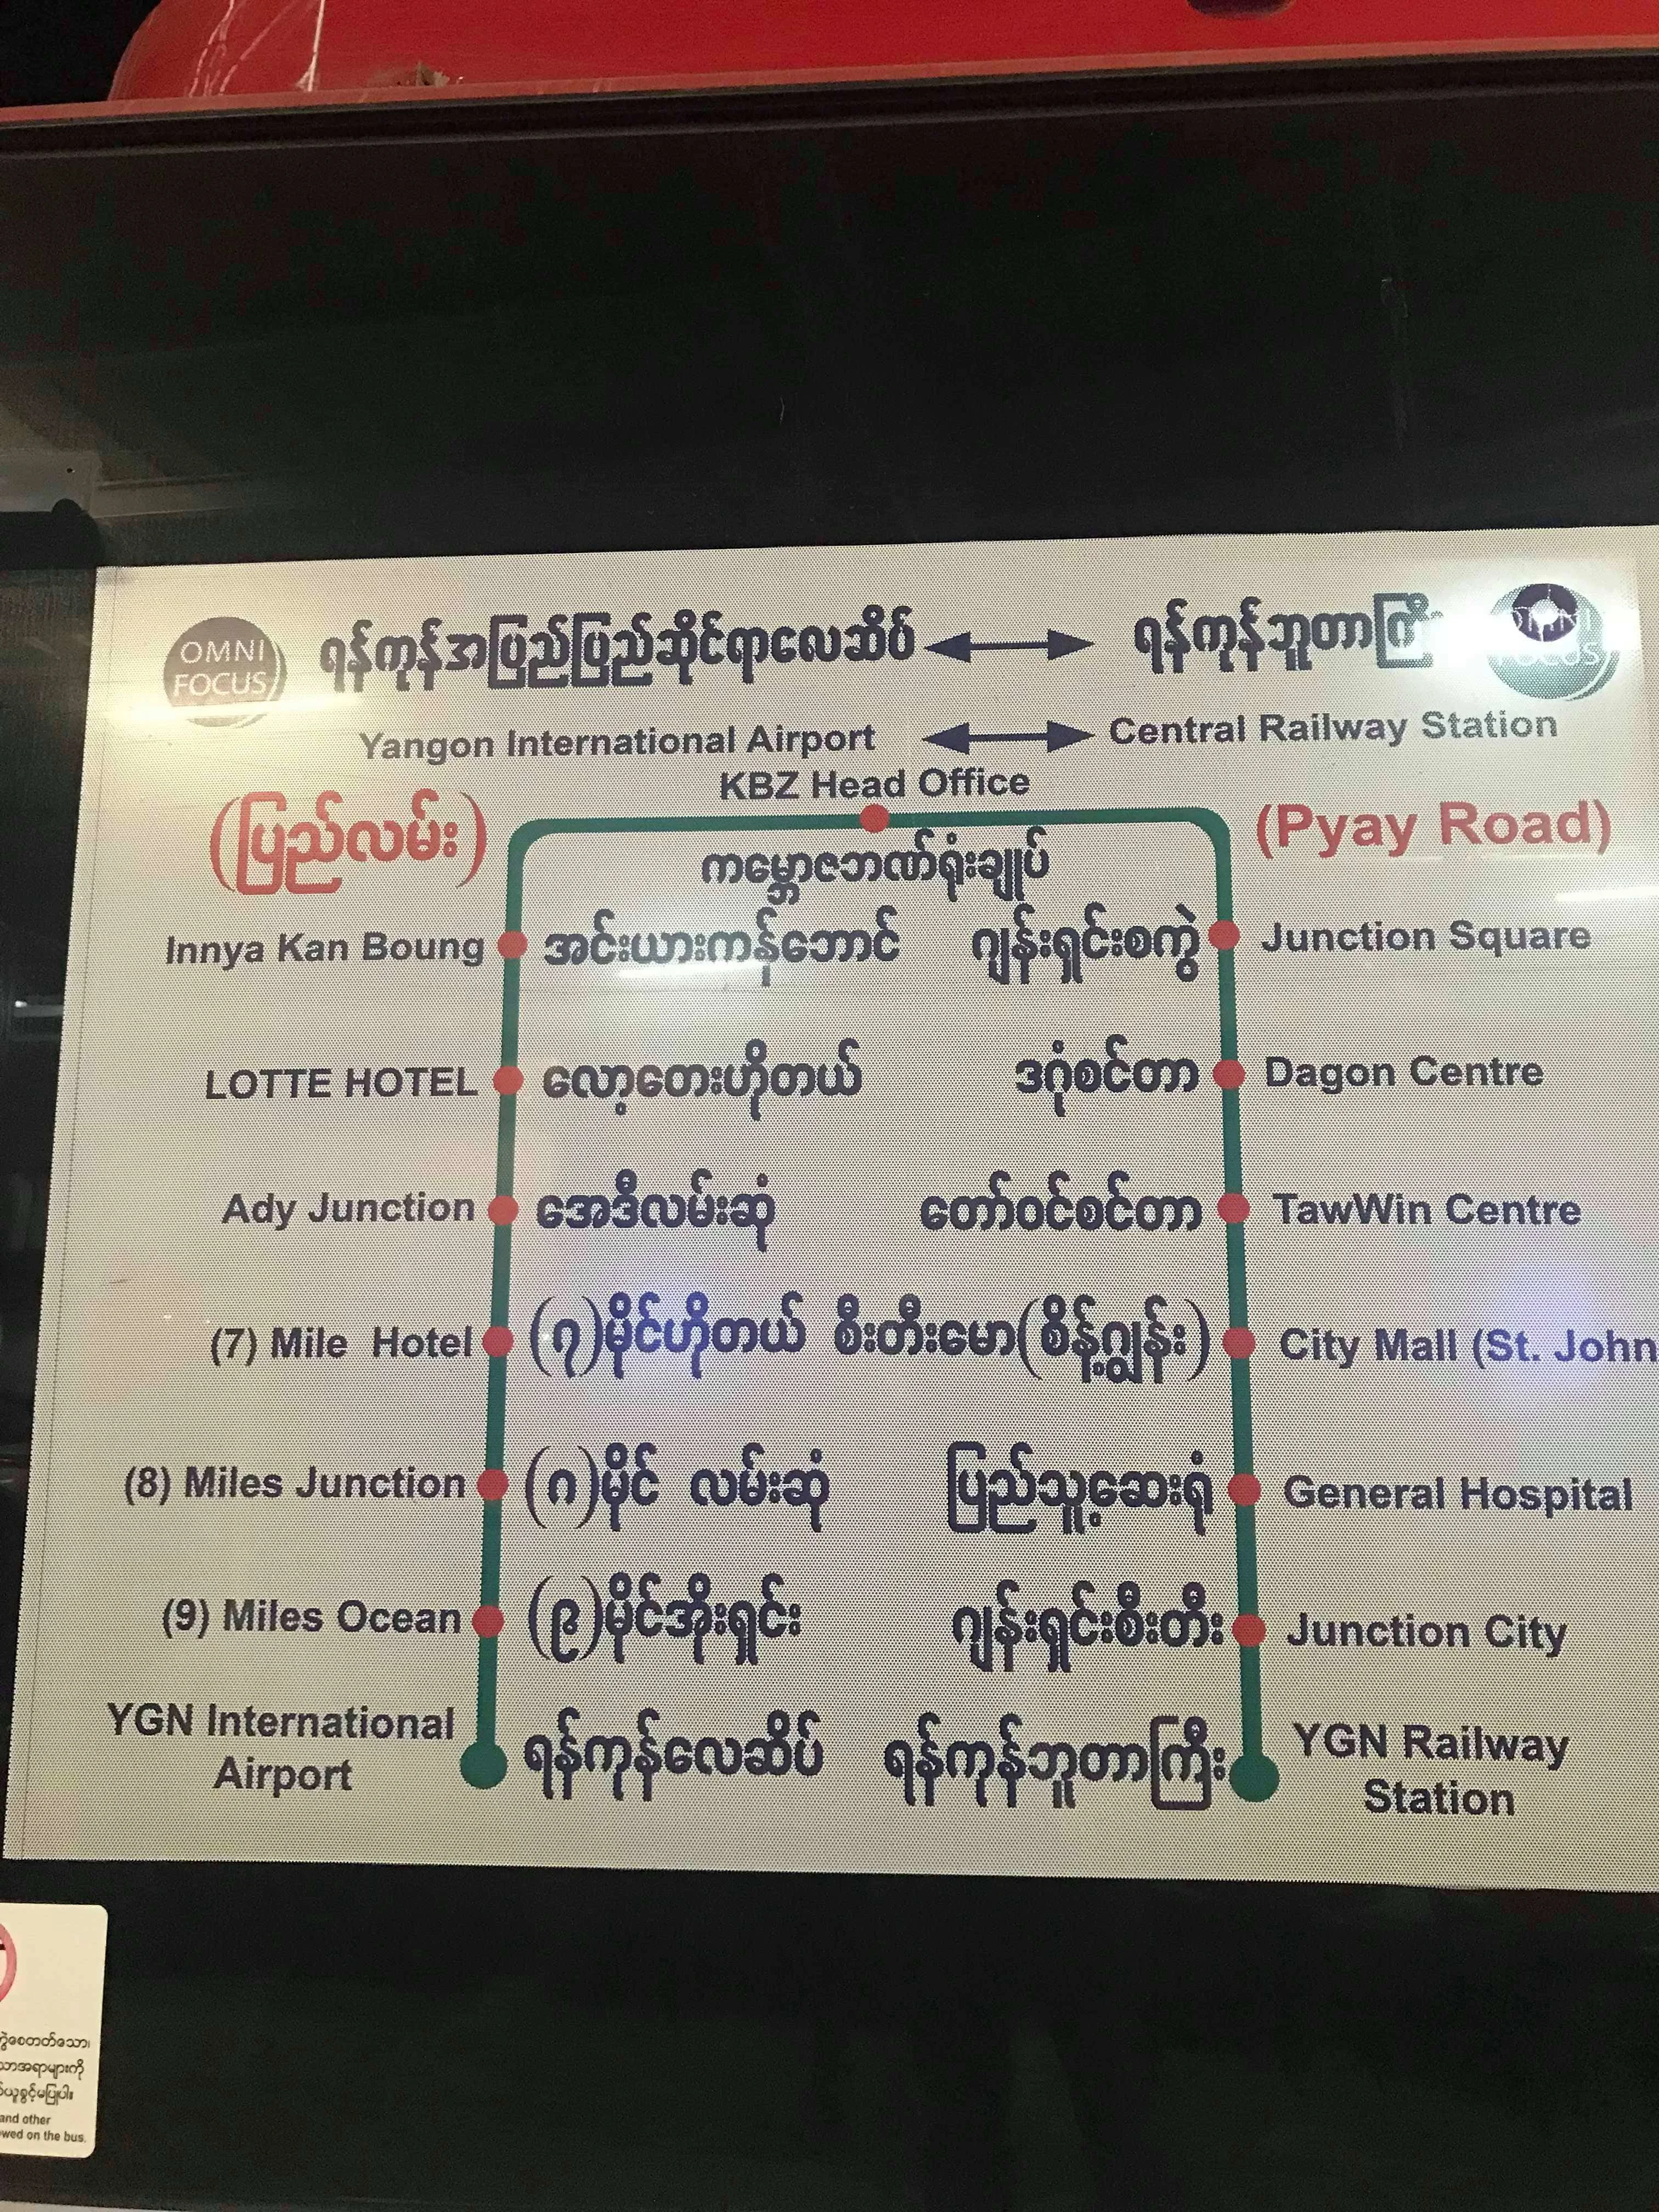 how to get to yangon from Yangon international airport, how to get to Yangon from the airport, how to get to Yangon